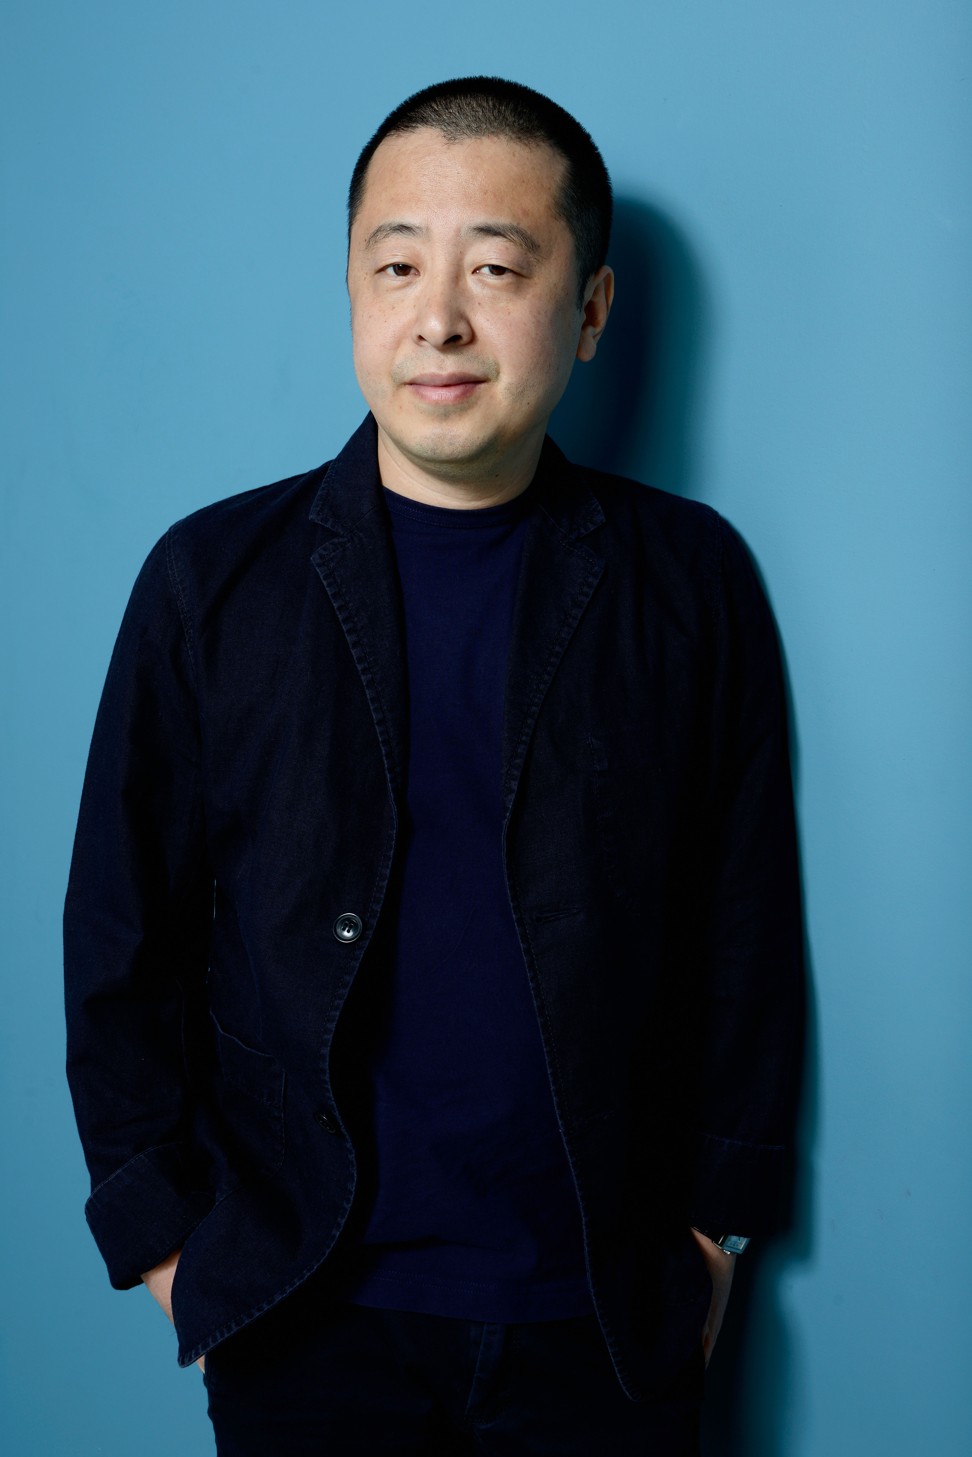 Director Jia Zhangke, winner of Best Screenplay for ‘Tian Zhu Ding’ (A Touch Of Sin) in 2013, returns to Cannes with the gangland love story ‘Ash Is Purest White’.